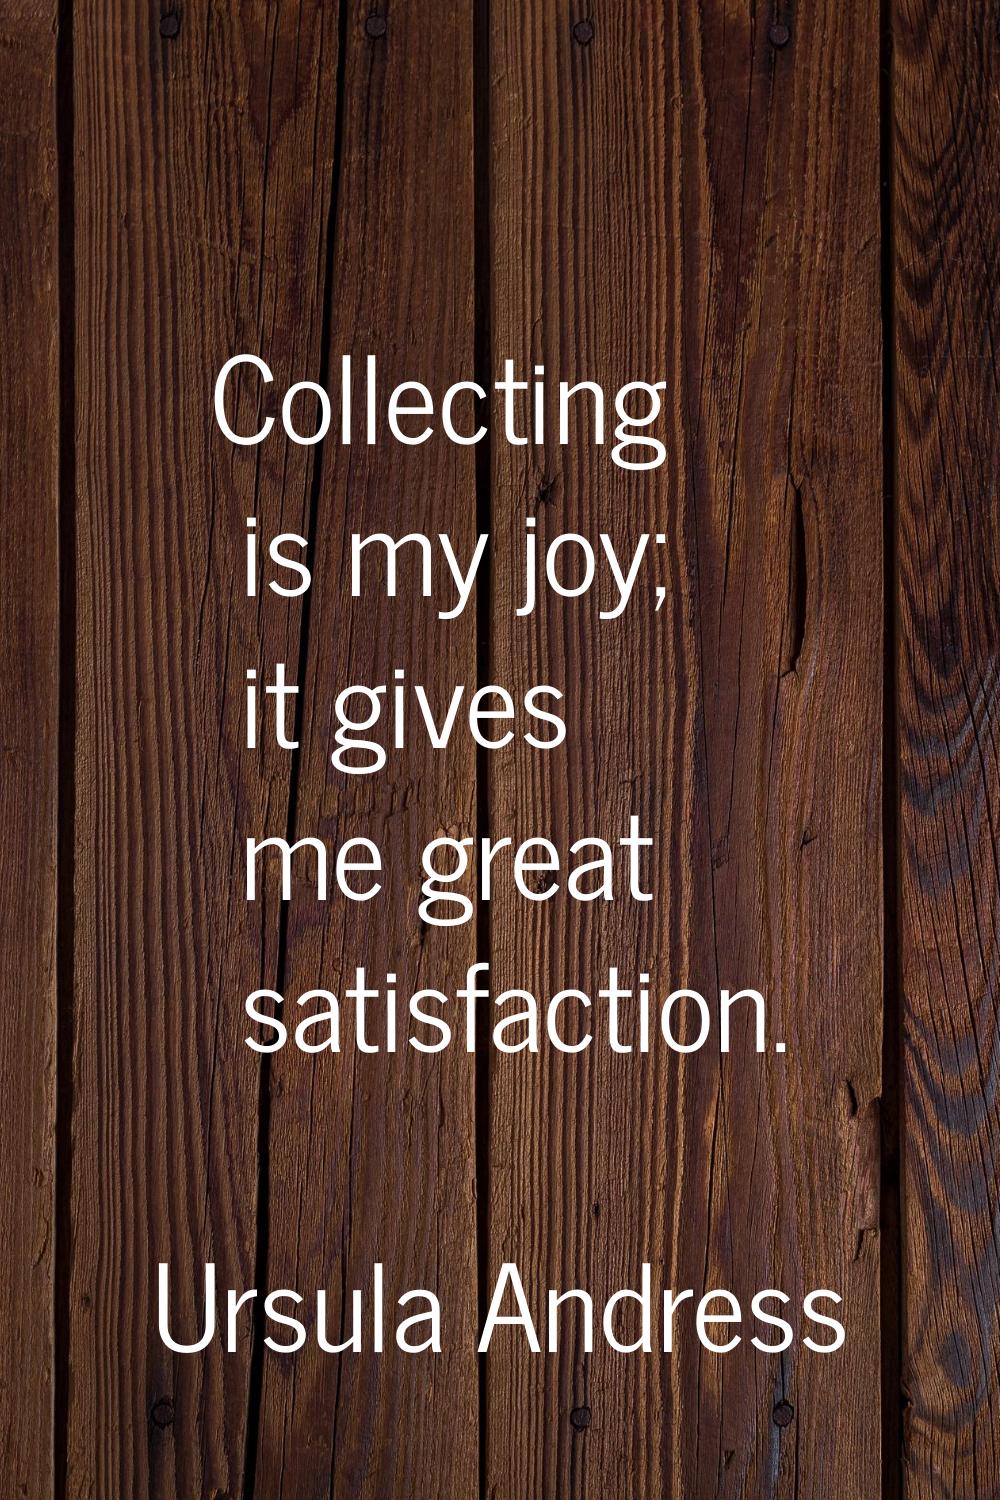 Collecting is my joy; it gives me great satisfaction.